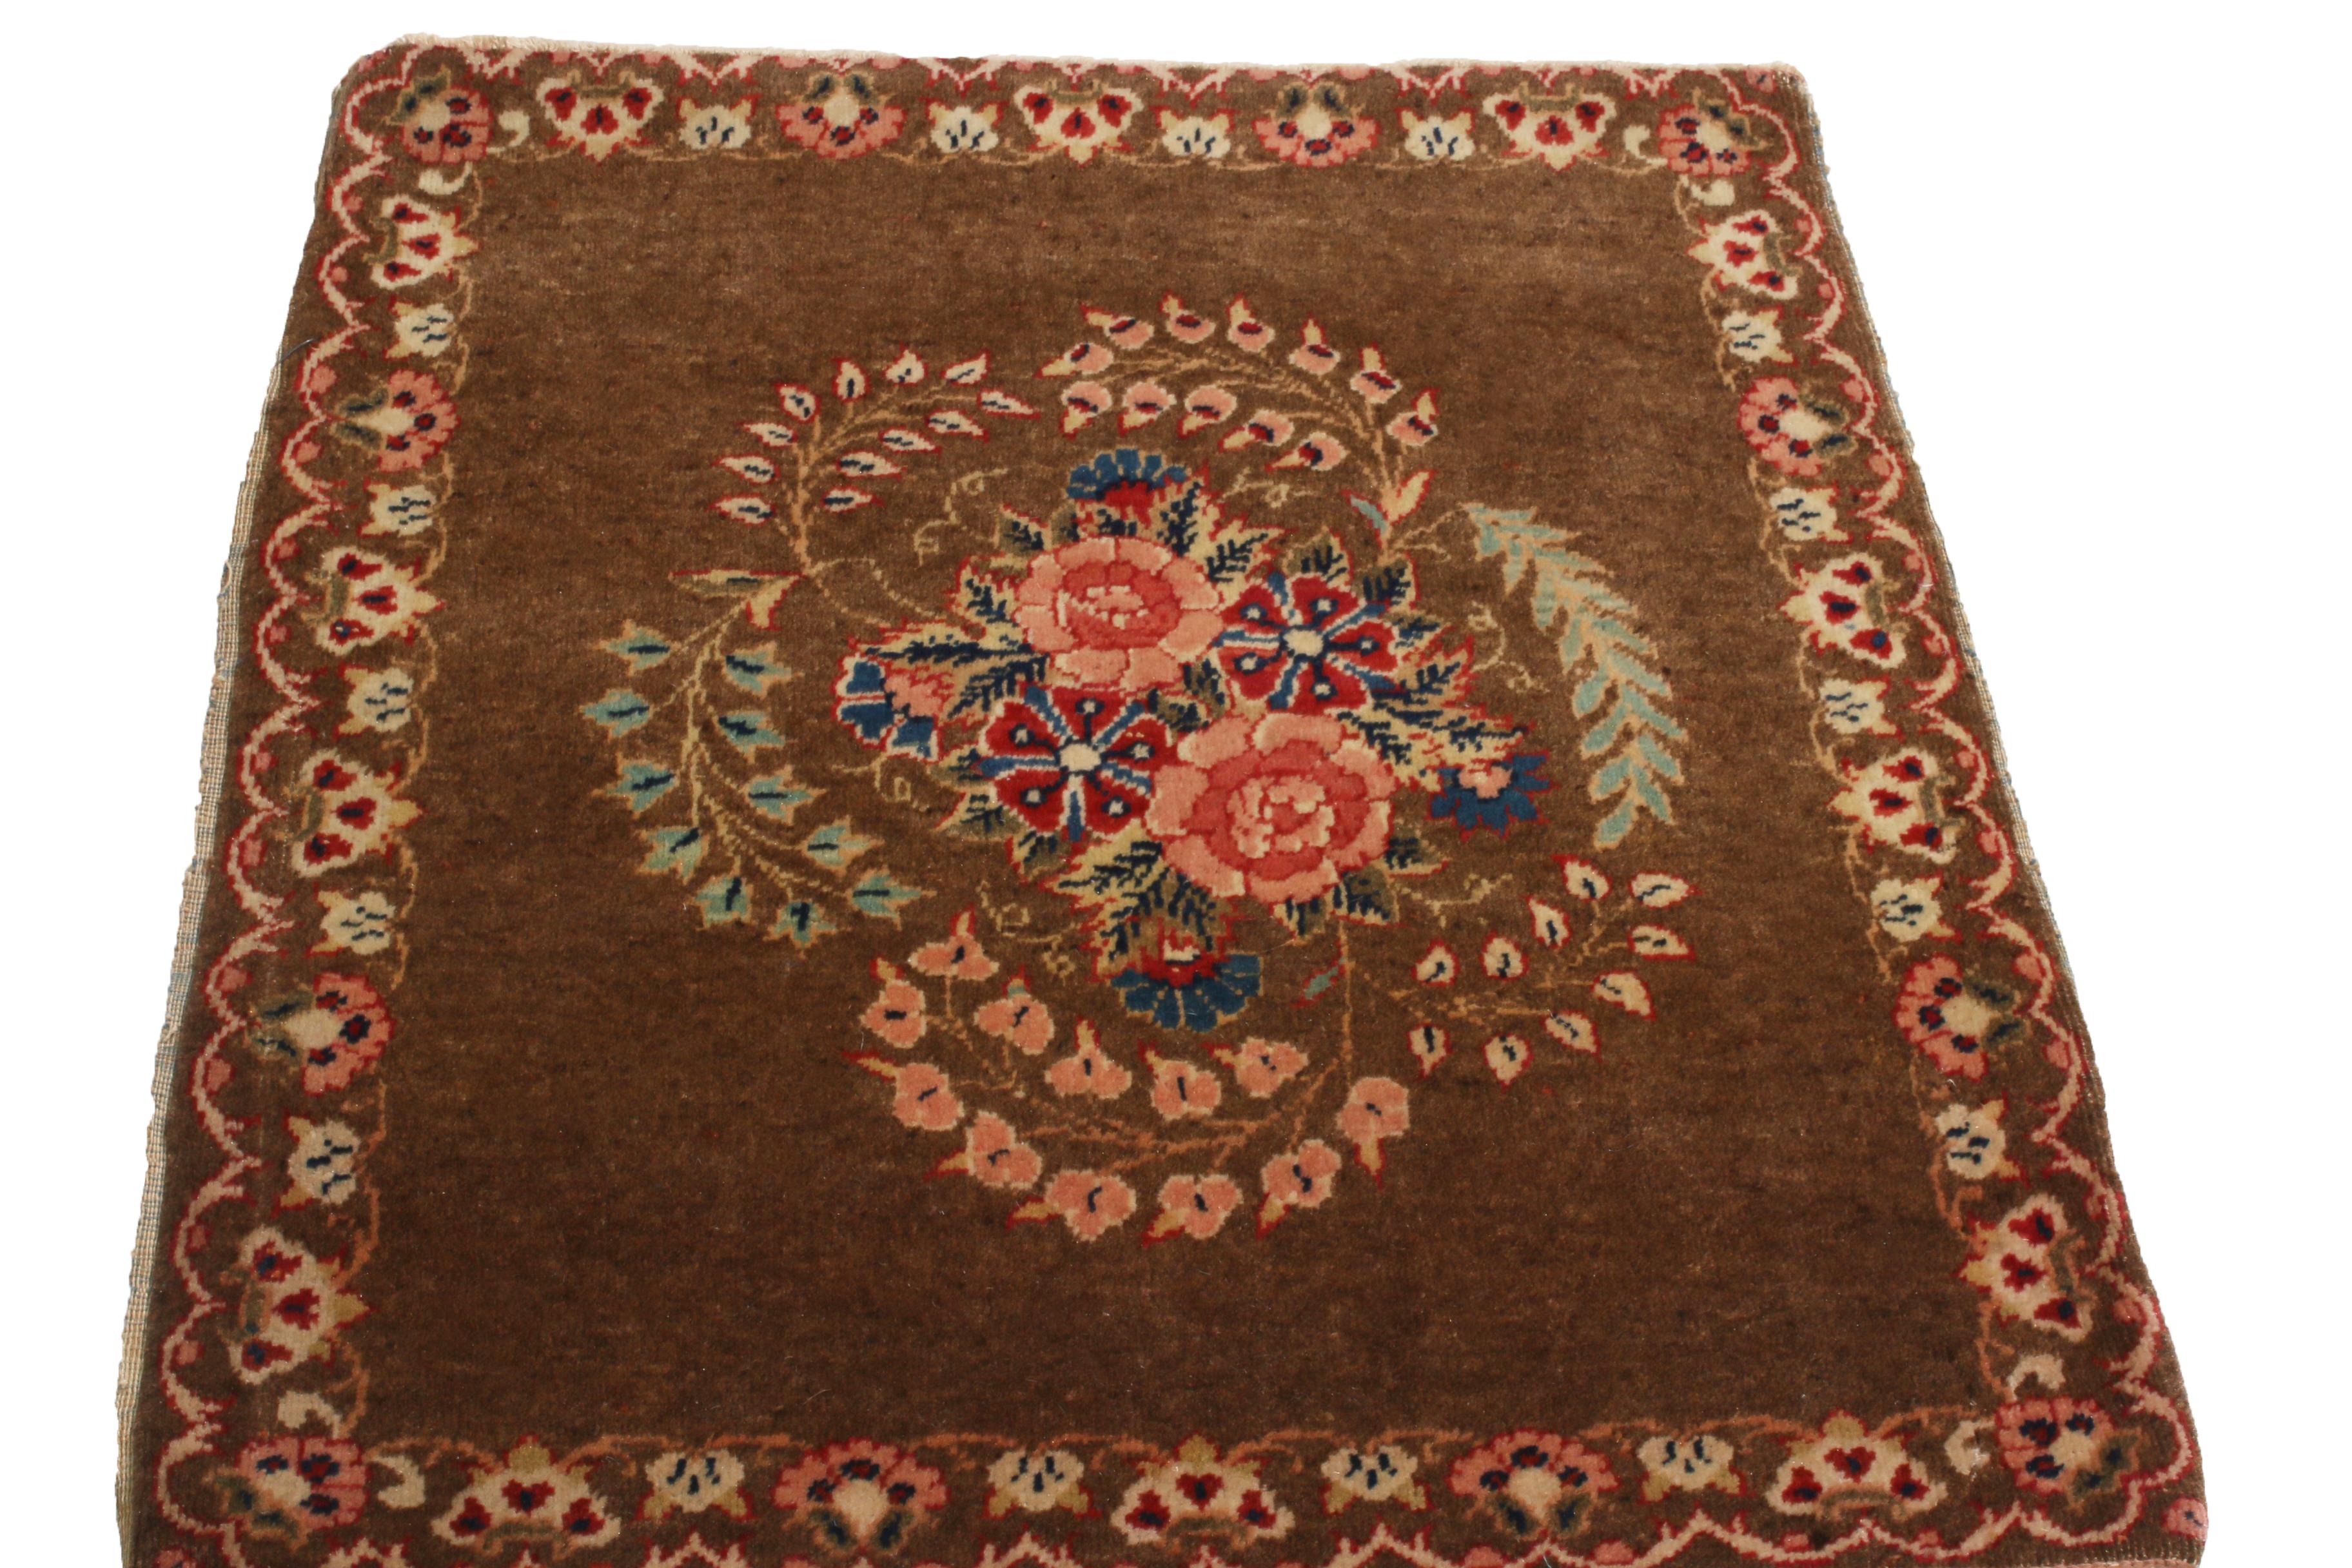 Hand-Knotted Antique Kashan Brown Wool Persian Rug with Floral Medallion